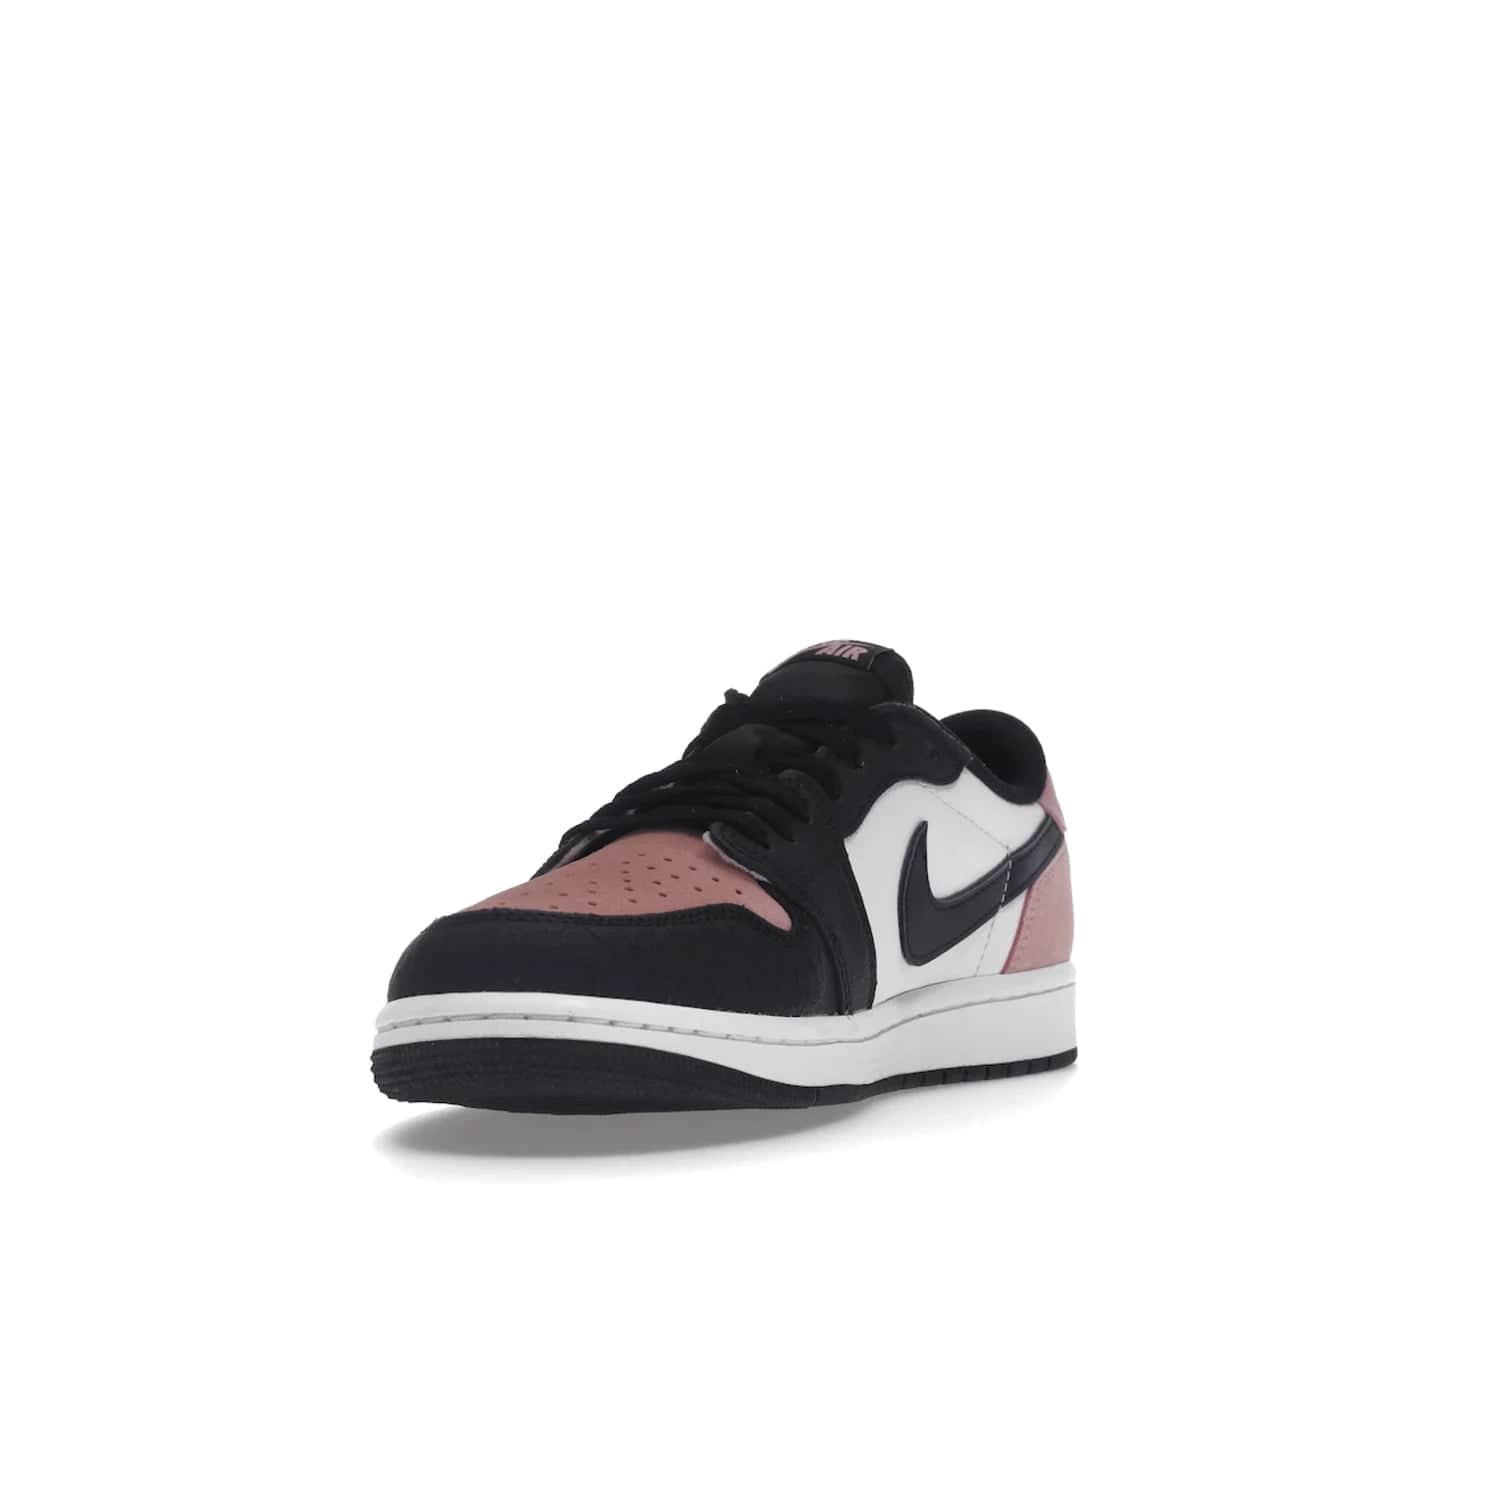 Jordan 1 Low OG Bleached Coral - Image 13 - Only at www.BallersClubKickz.com - Introducing the Air Jordan 1 Low OG Bleached Coral. Constructed with white leather, black cracked leather & Bleached Coral suede. Signature Jordan Wings logo, white Air sole. Get the pack in July 2022 and stand out.